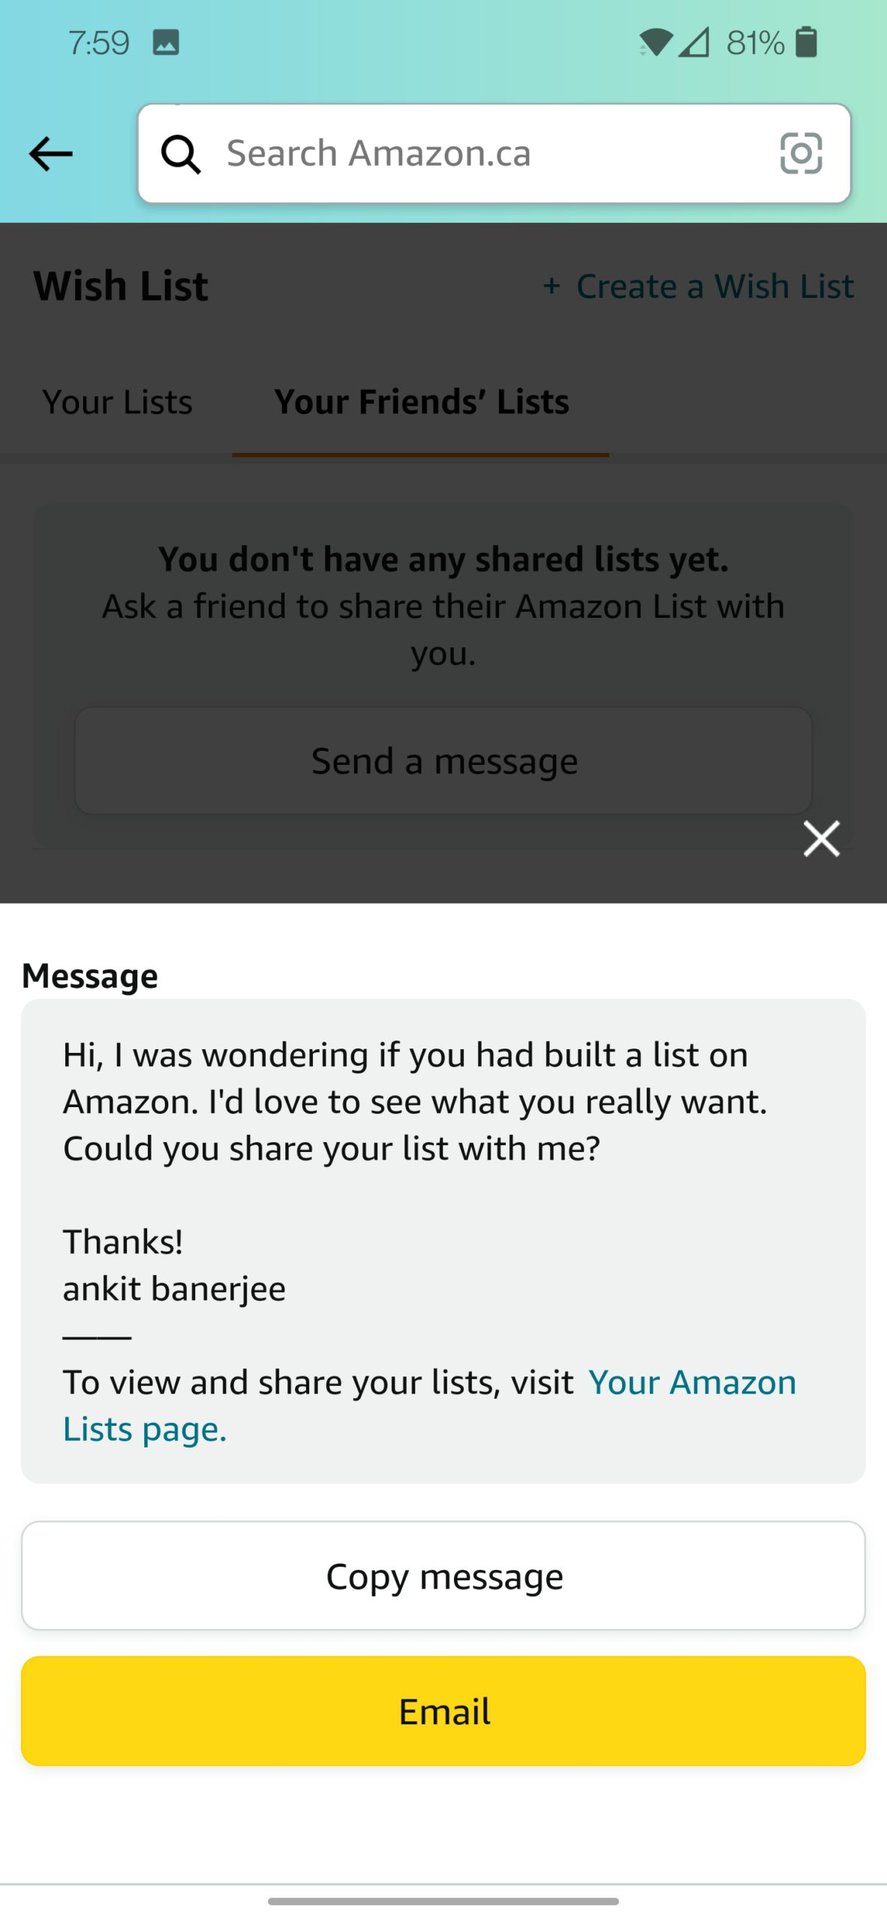 https://www.androidauthority.com/wp-content/uploads/2022/08/amazon-app-send-message-to-ask-for-wishlist-scaled.jpg